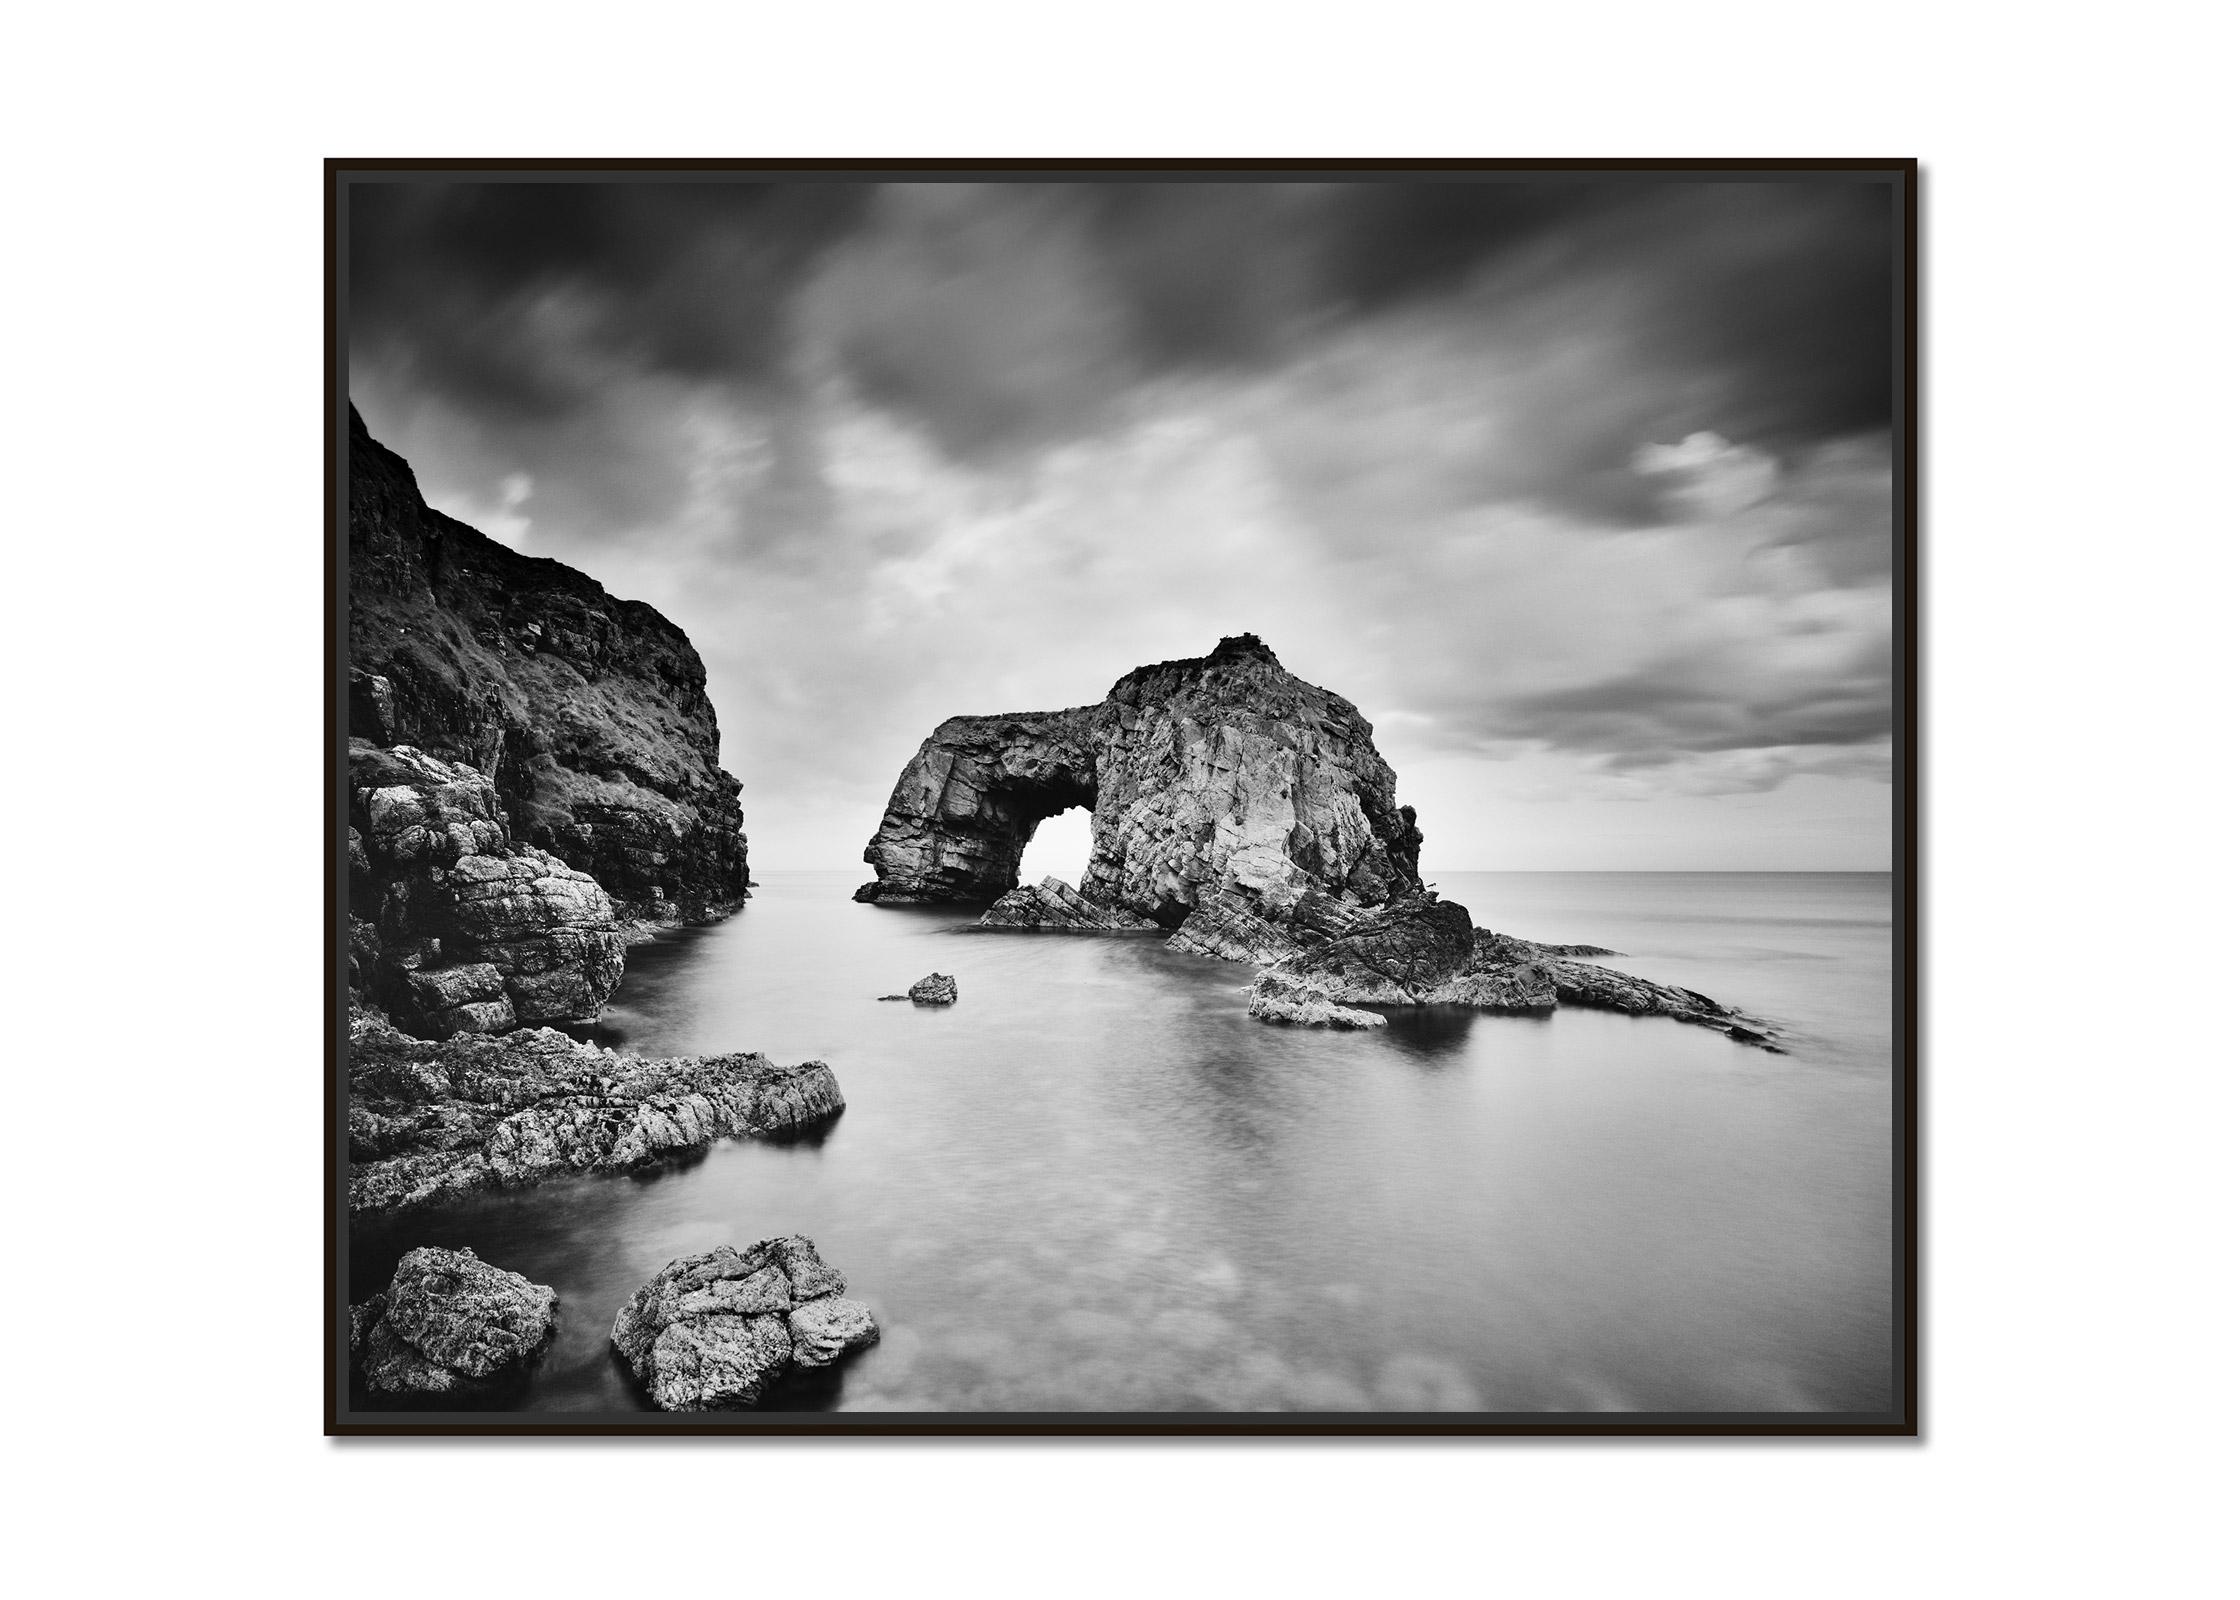 Great Pollet Sea Arch, Ireland, black and white fine art waterscape photography  - Photograph by Gerald Berghammer